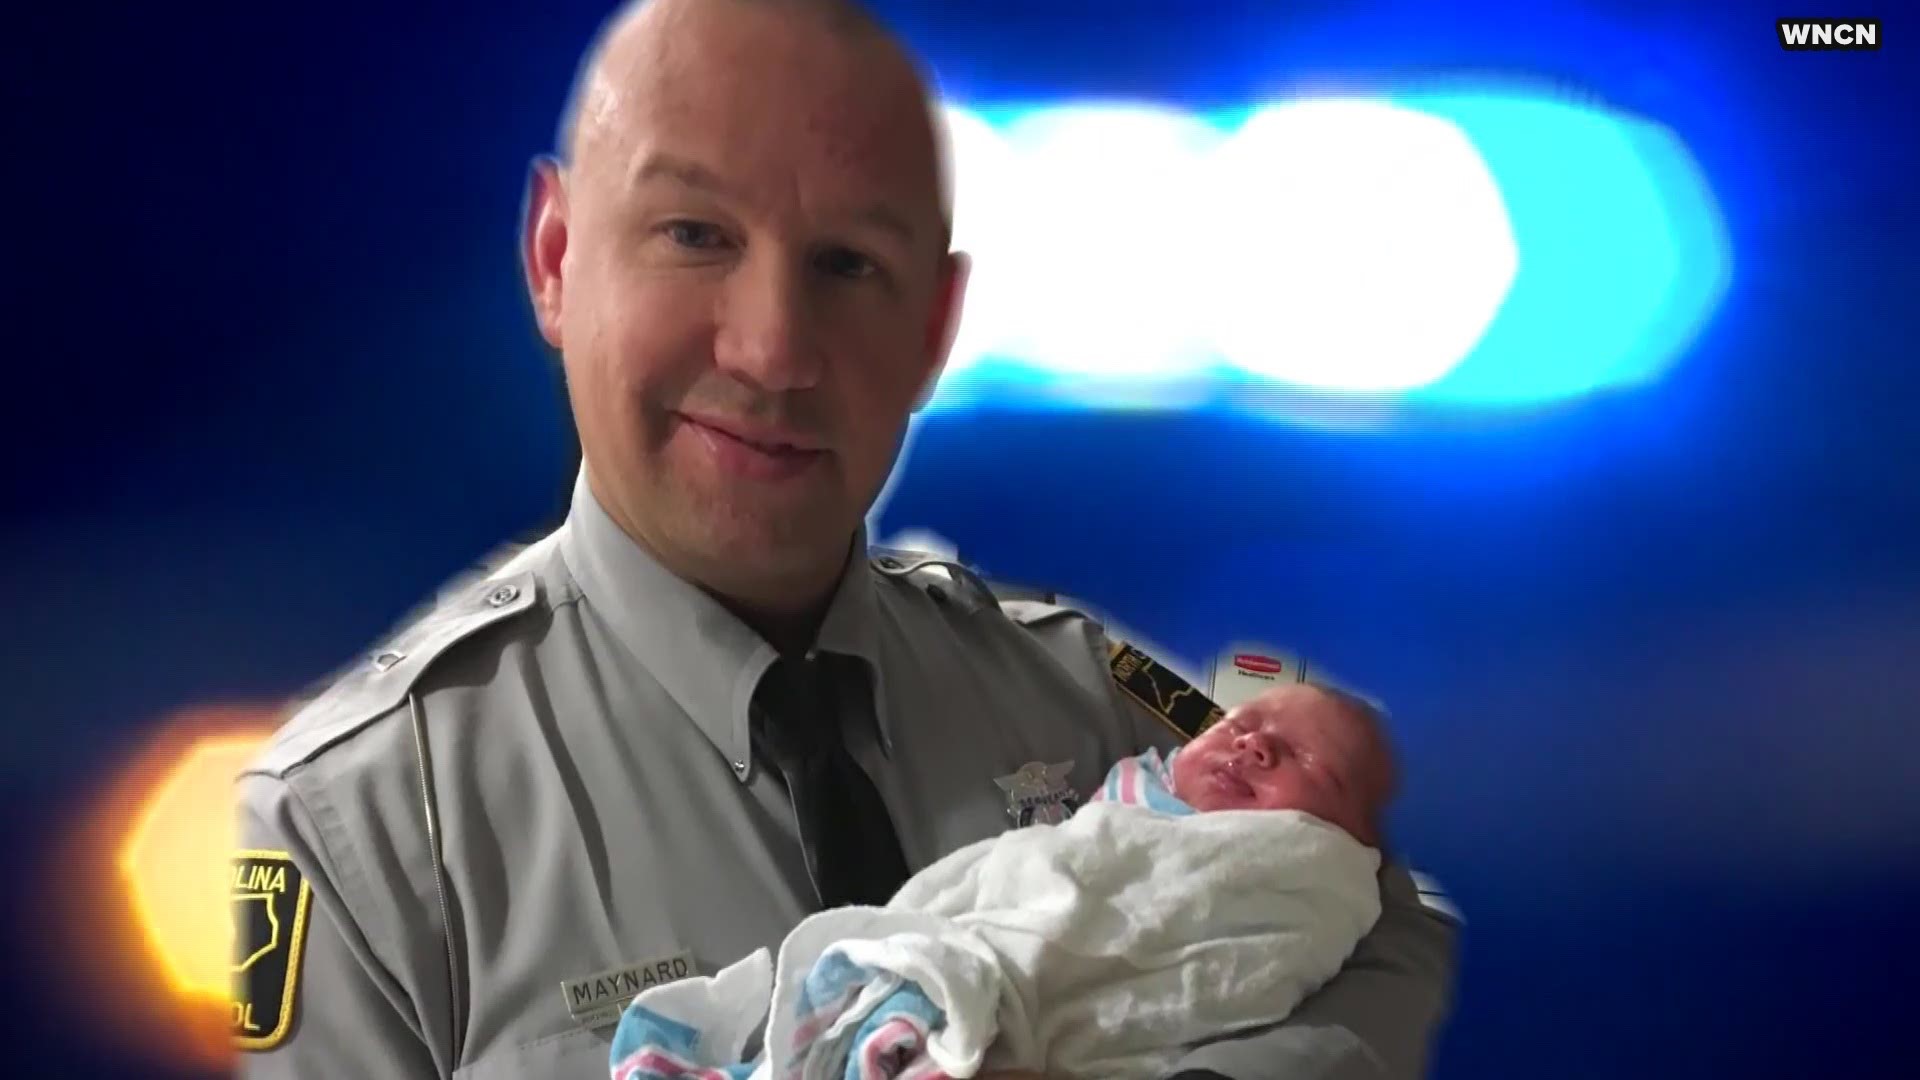 Wake County North Carolina State Highway Patrol Trooper Sergeant Brian Maynard can now add baby deliverer to his resume.  He stopped a speeding van then helped to deliver a baby!